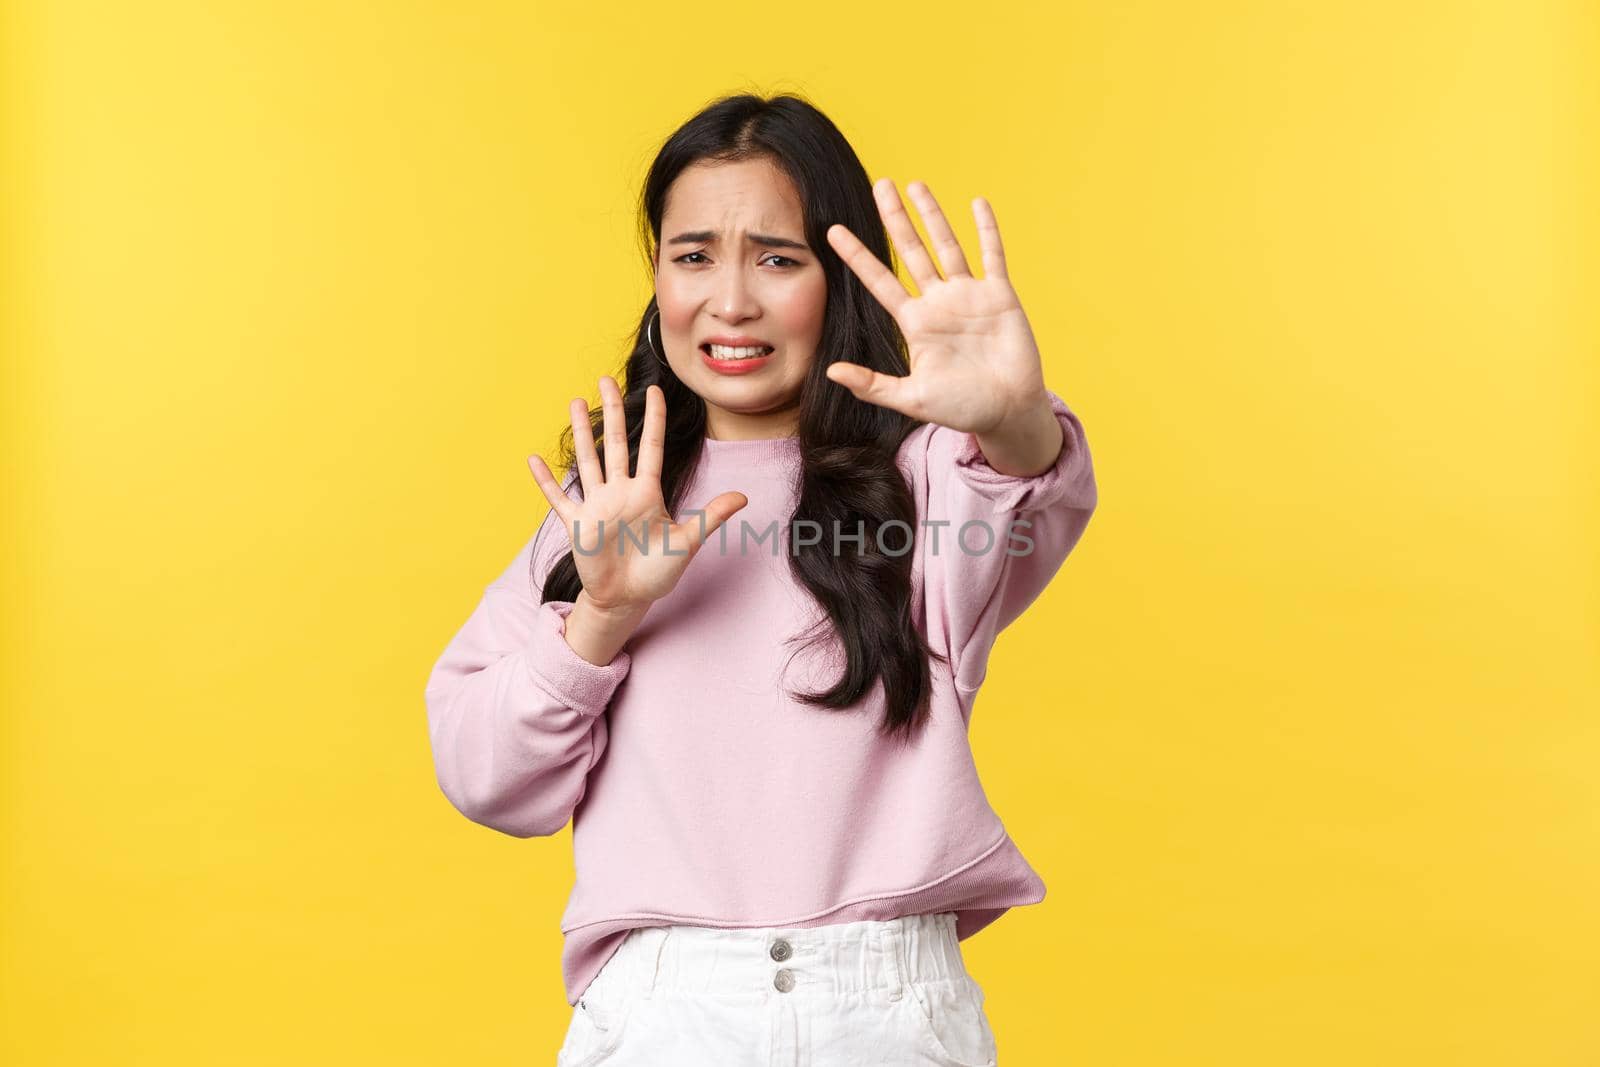 People emotions, lifestyle and fashion concept. Alarmed and displeased asian woman raising hands defensive, asking to stop, feeling anxious and scared standing yellow background.